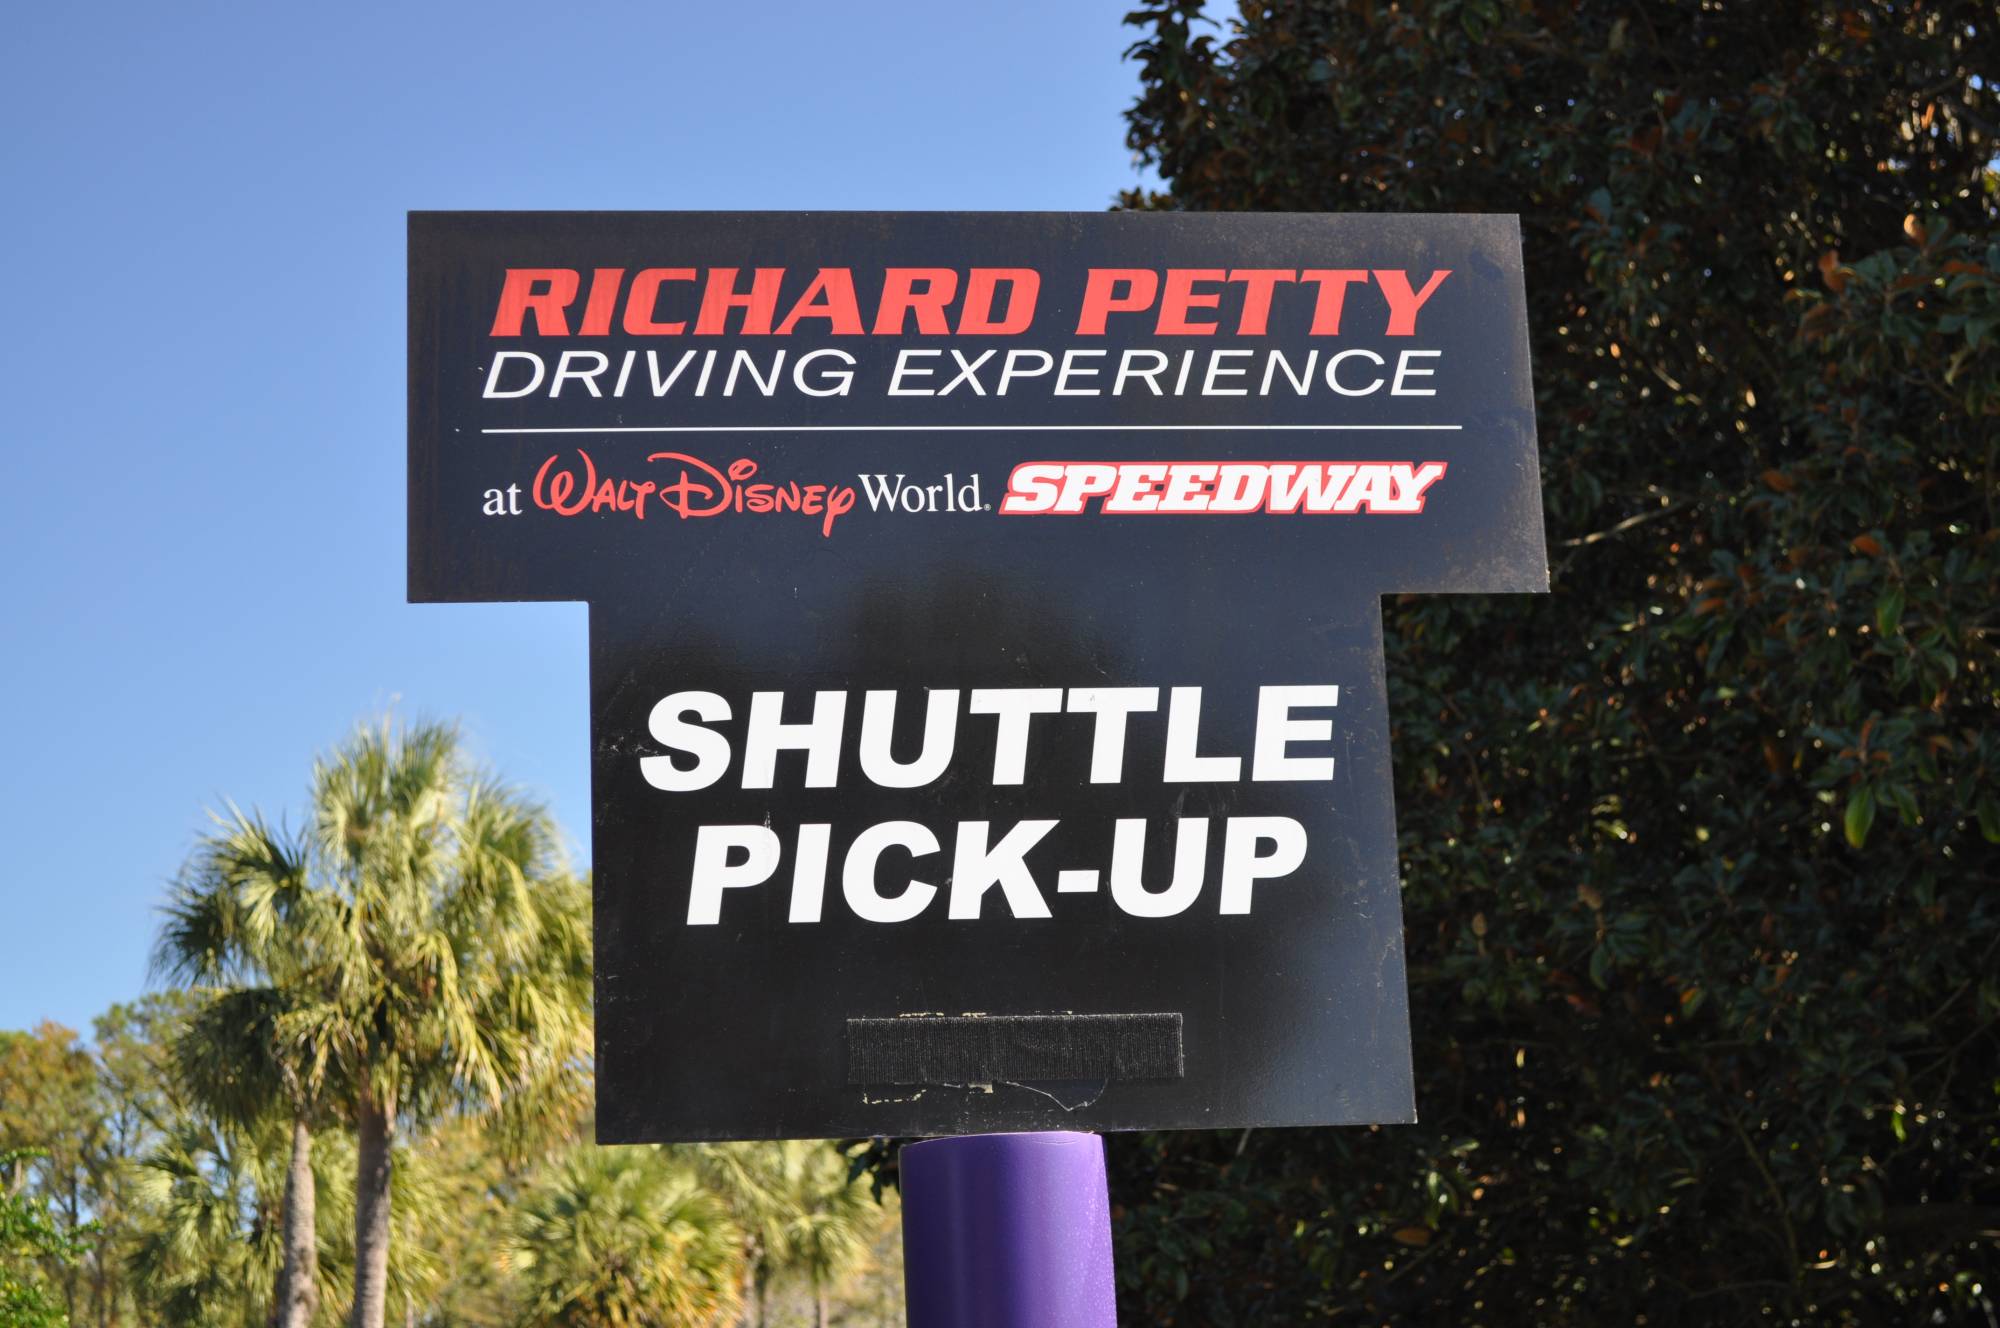 Feel the Need for Speed at the Richard Petty Driving Experience |PassPorter.com